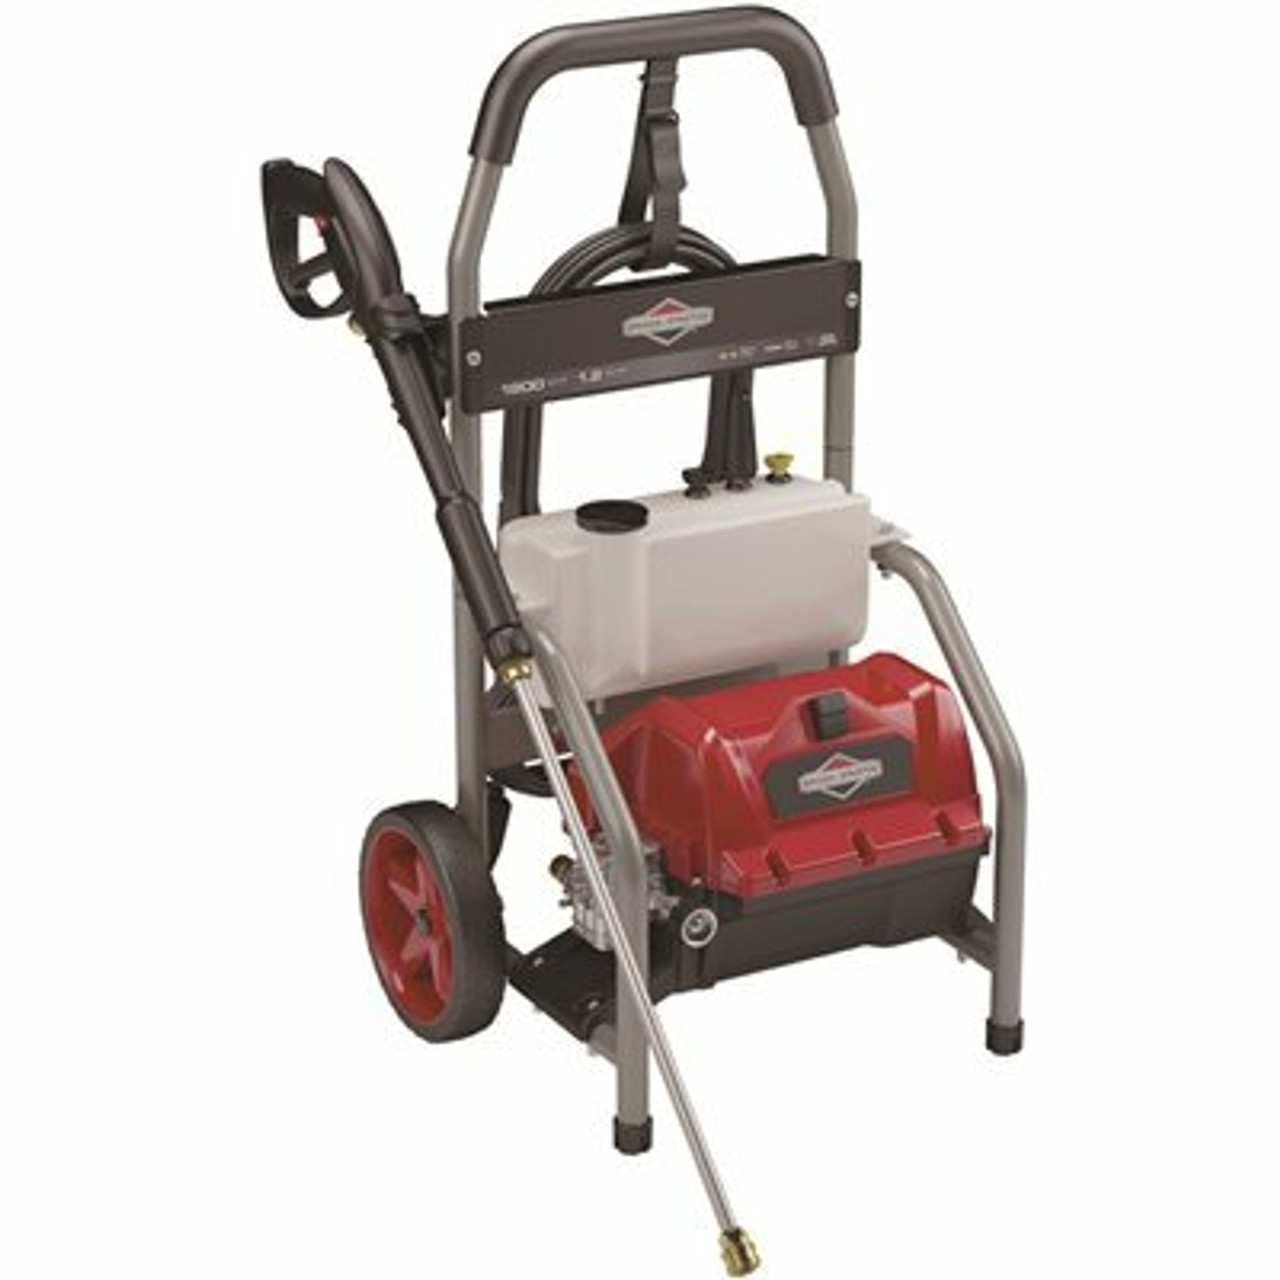 Briggs & Stratton 1800 Psi 1.2 Gpm Electric Pressure Washer With Universal Motor